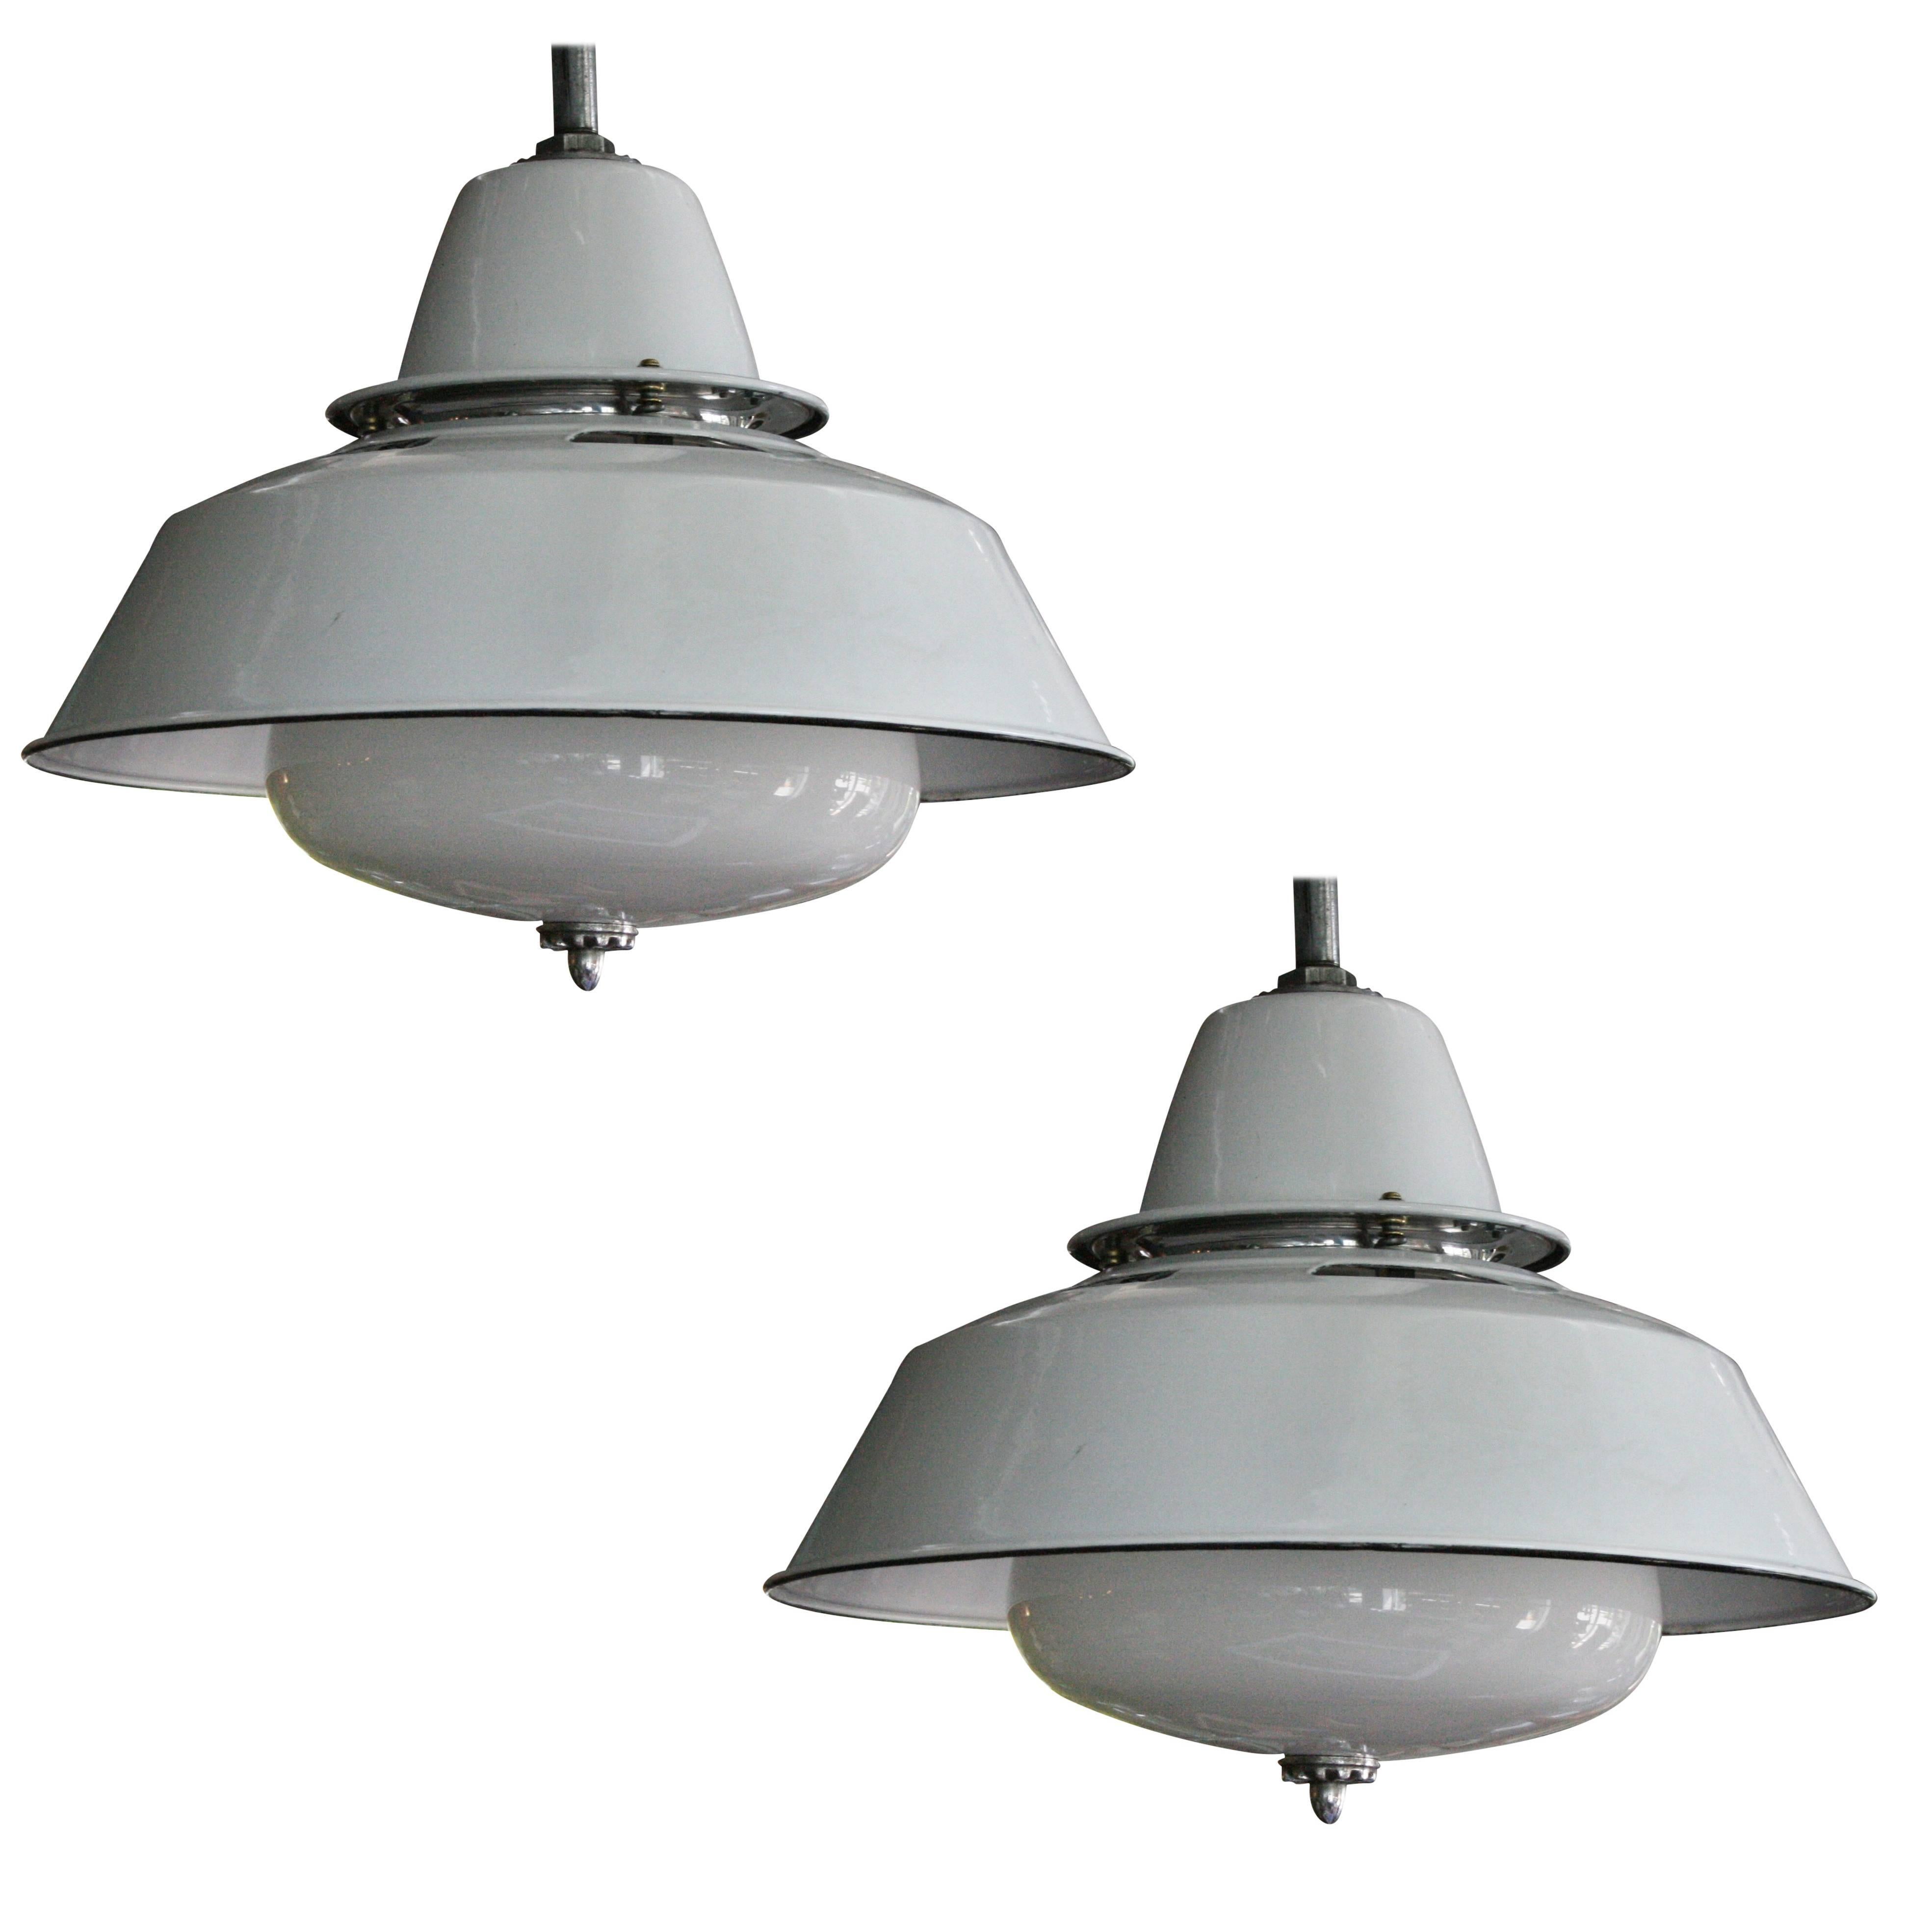 Pair of Large White Enameled Pendant Lights with Original Milk Glass Shades